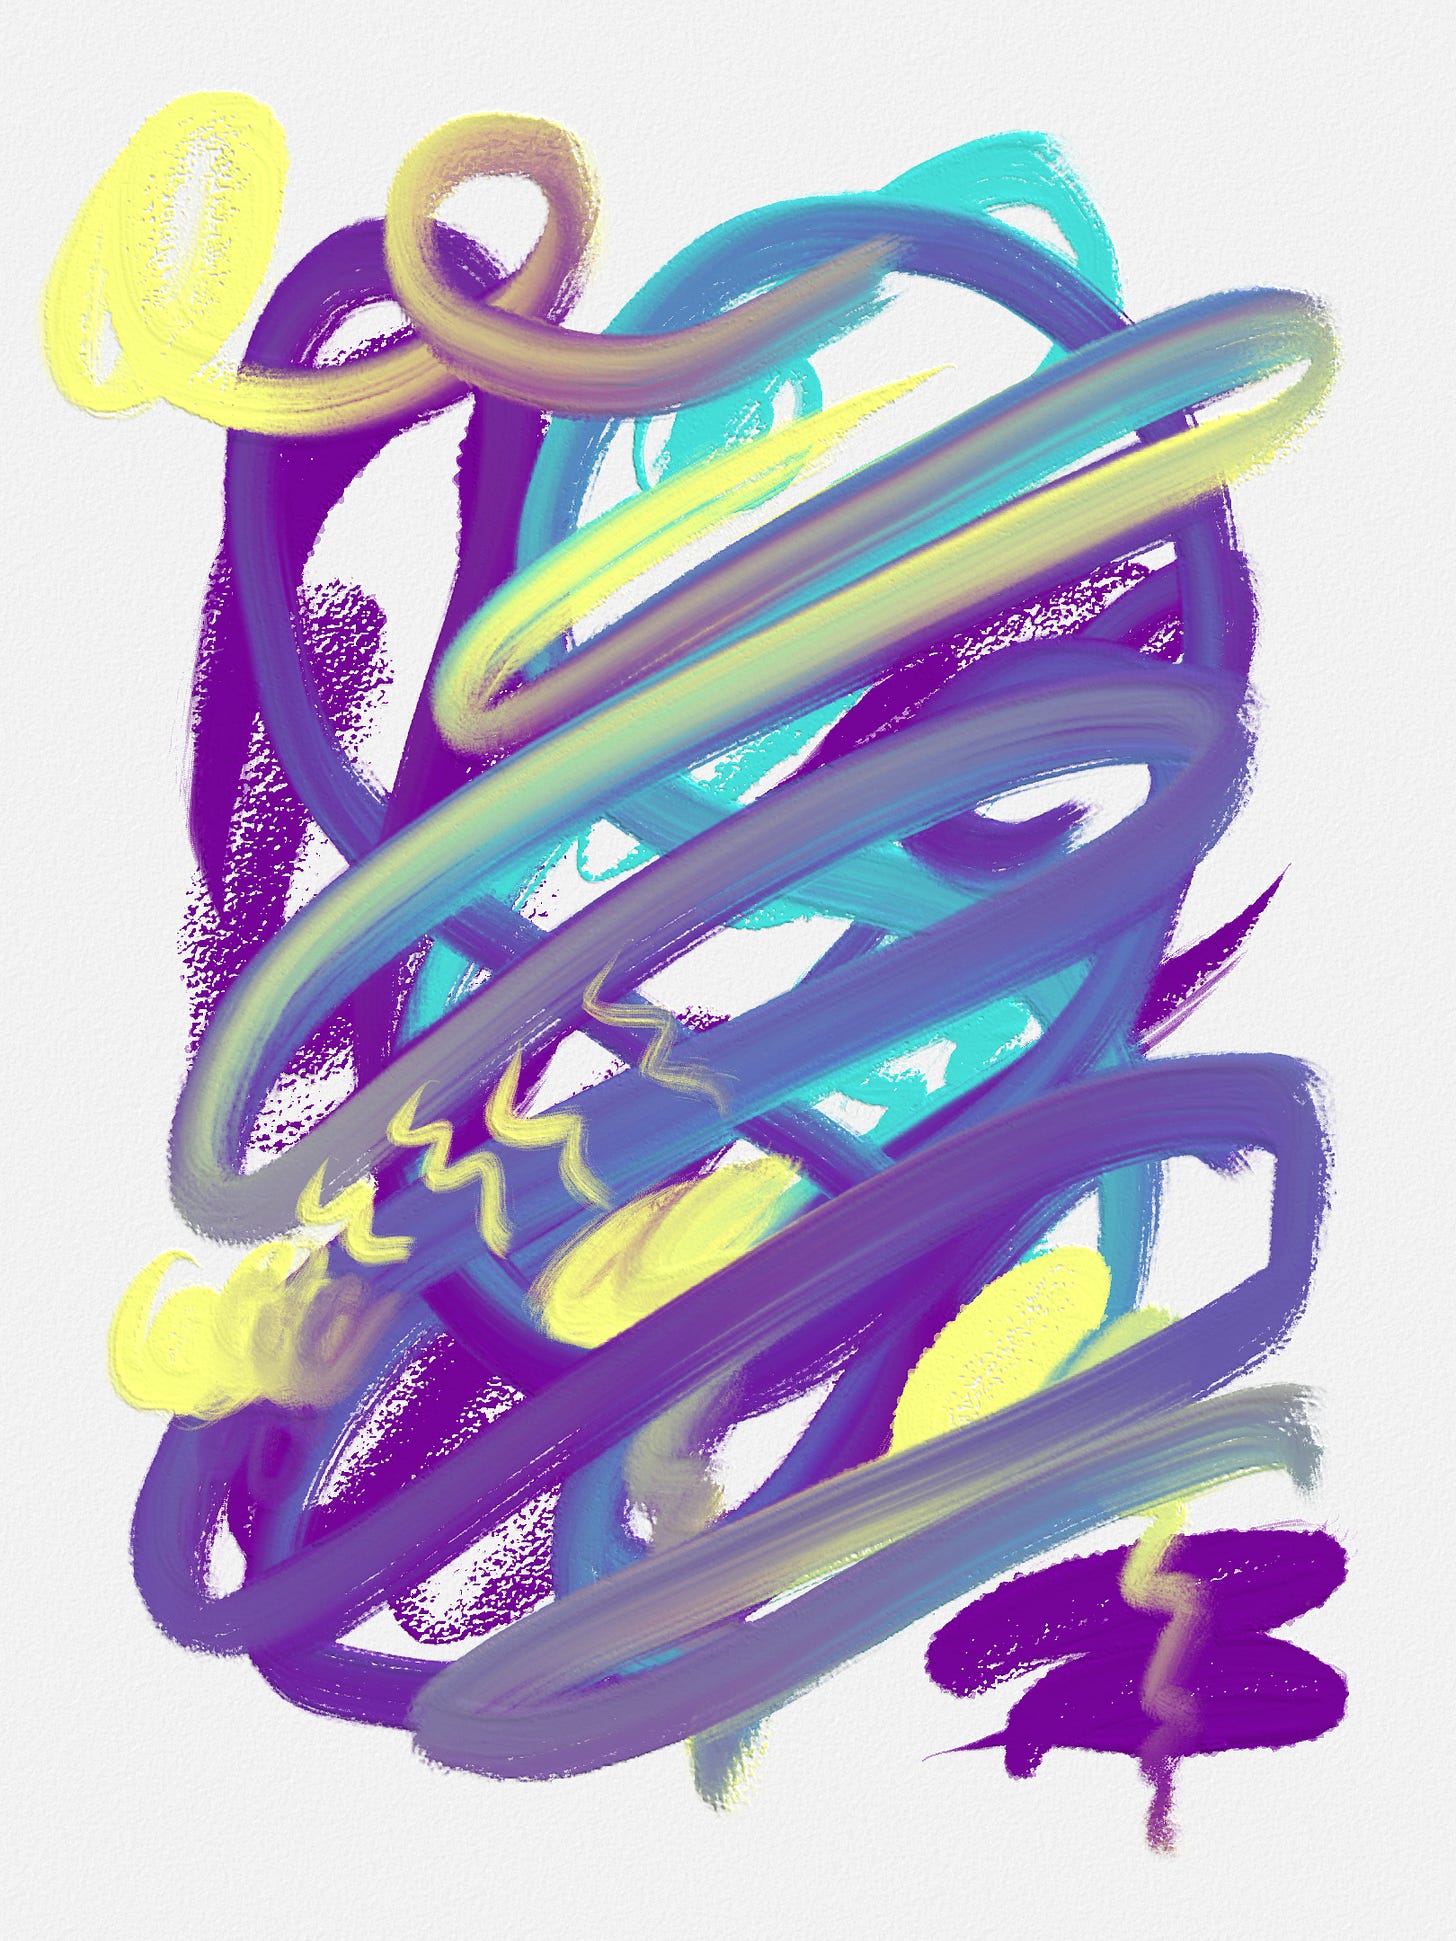 Abstract digital art showing purple, turquoise, and yellow strokes